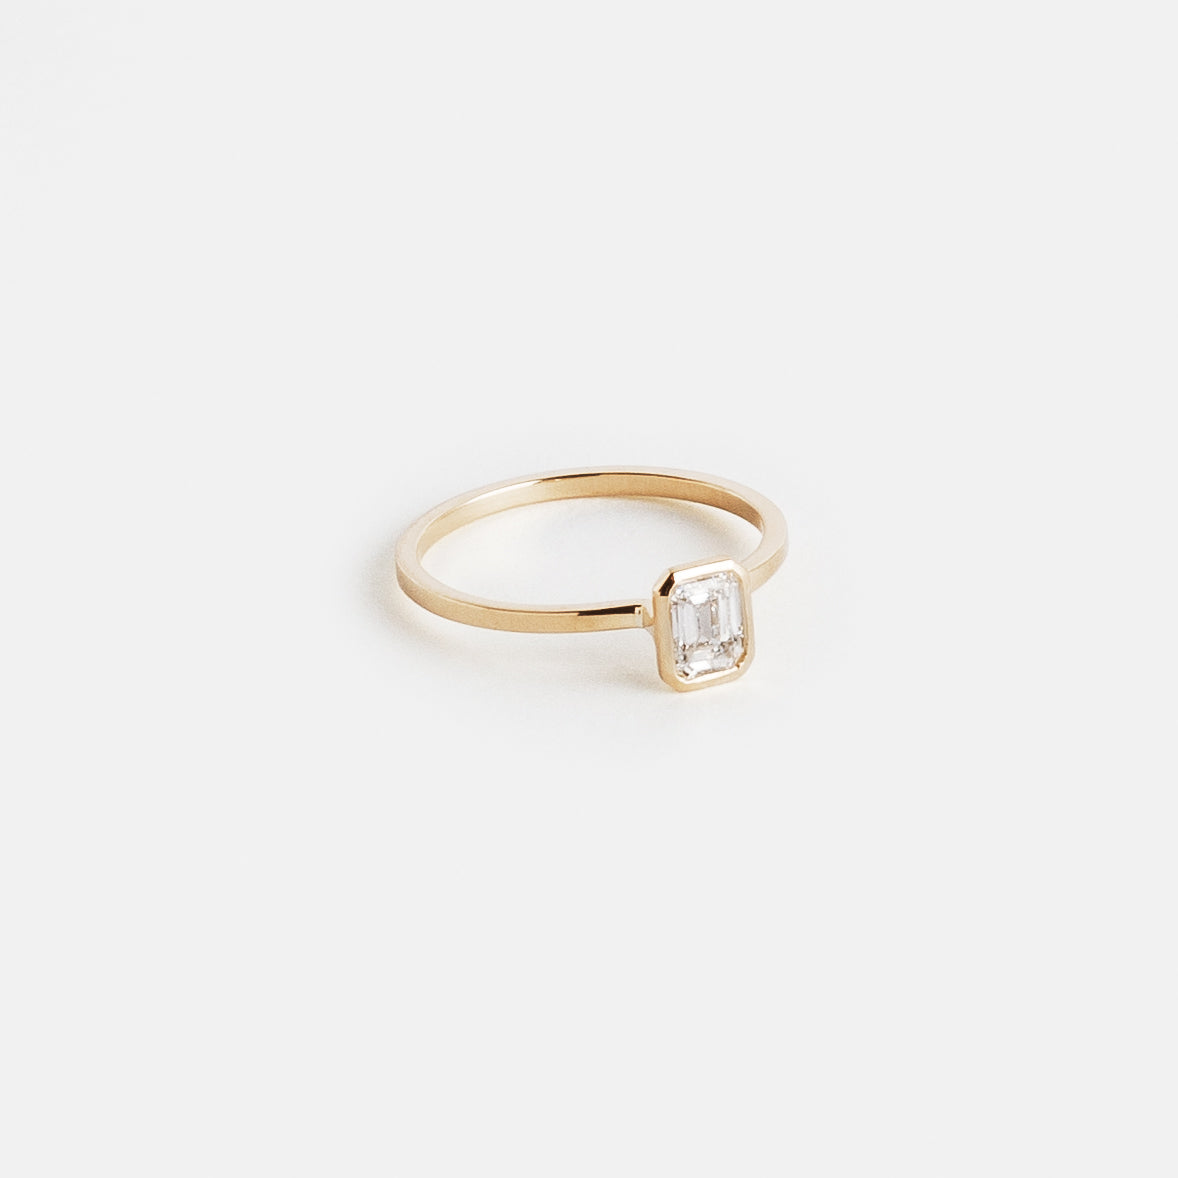 Auda Simple Ring in 14k Gold set with an emerald cut lab-grown diamond By SHW Fine Jewelry NYC